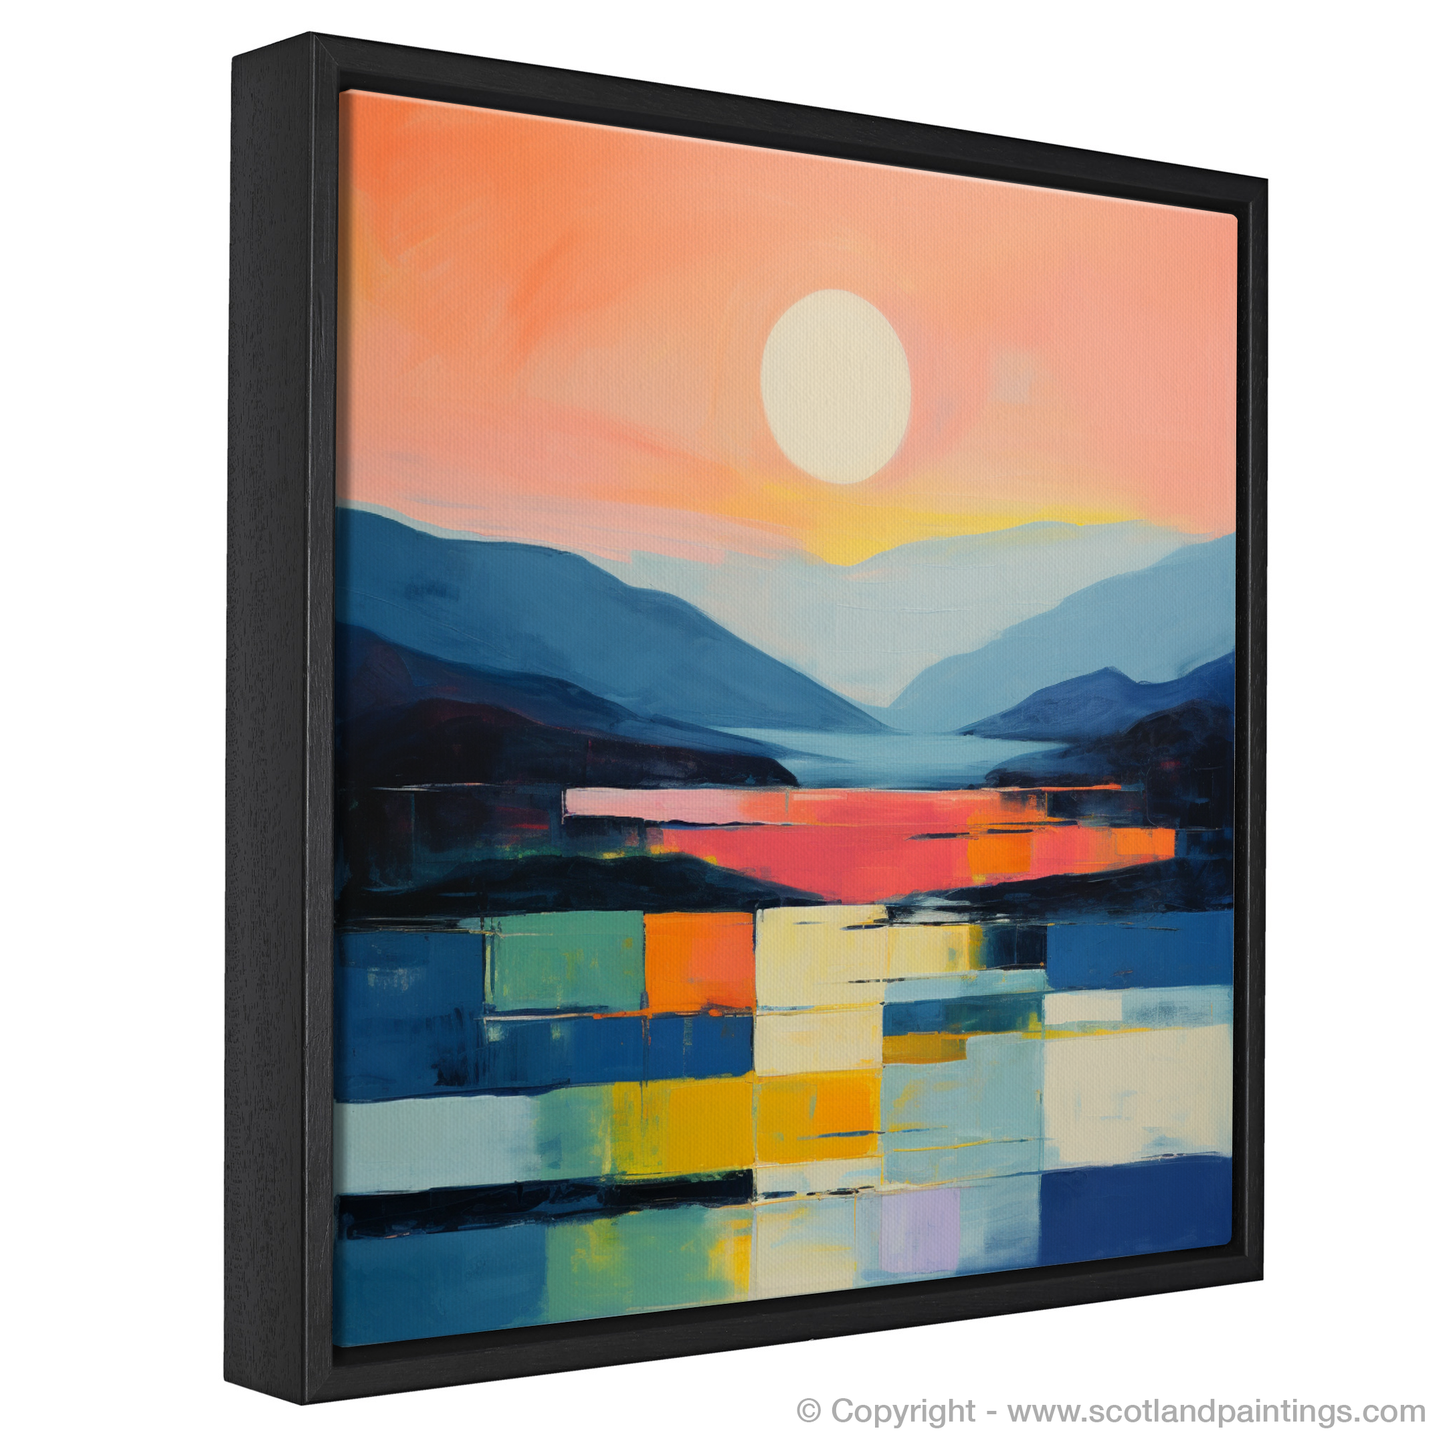 Painting and Art Print of Dusk on Loch Lomond entitled "Dusk Embrace over Loch Lomond - An Abstract Vision".